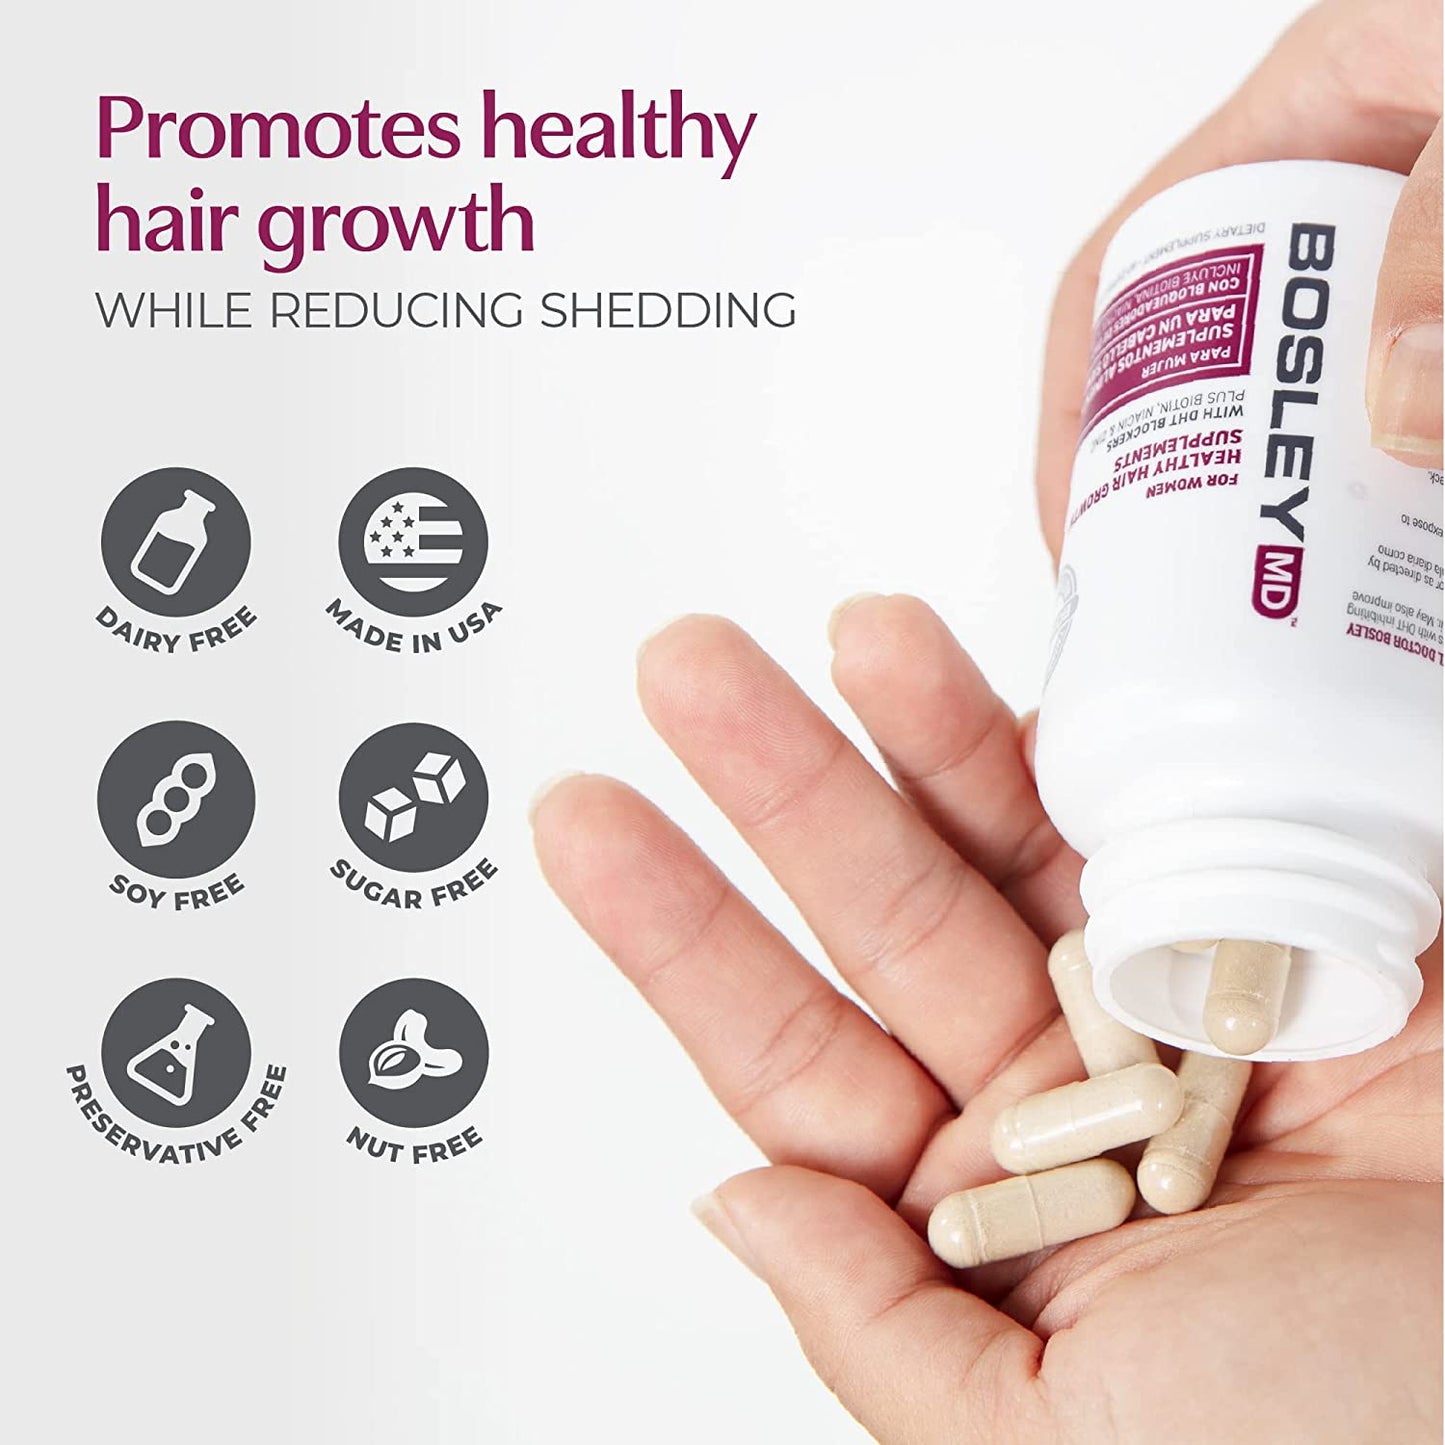 Bosley Healthy Hair Growth Supplement for Women - 60 Count. 2 Month Supply